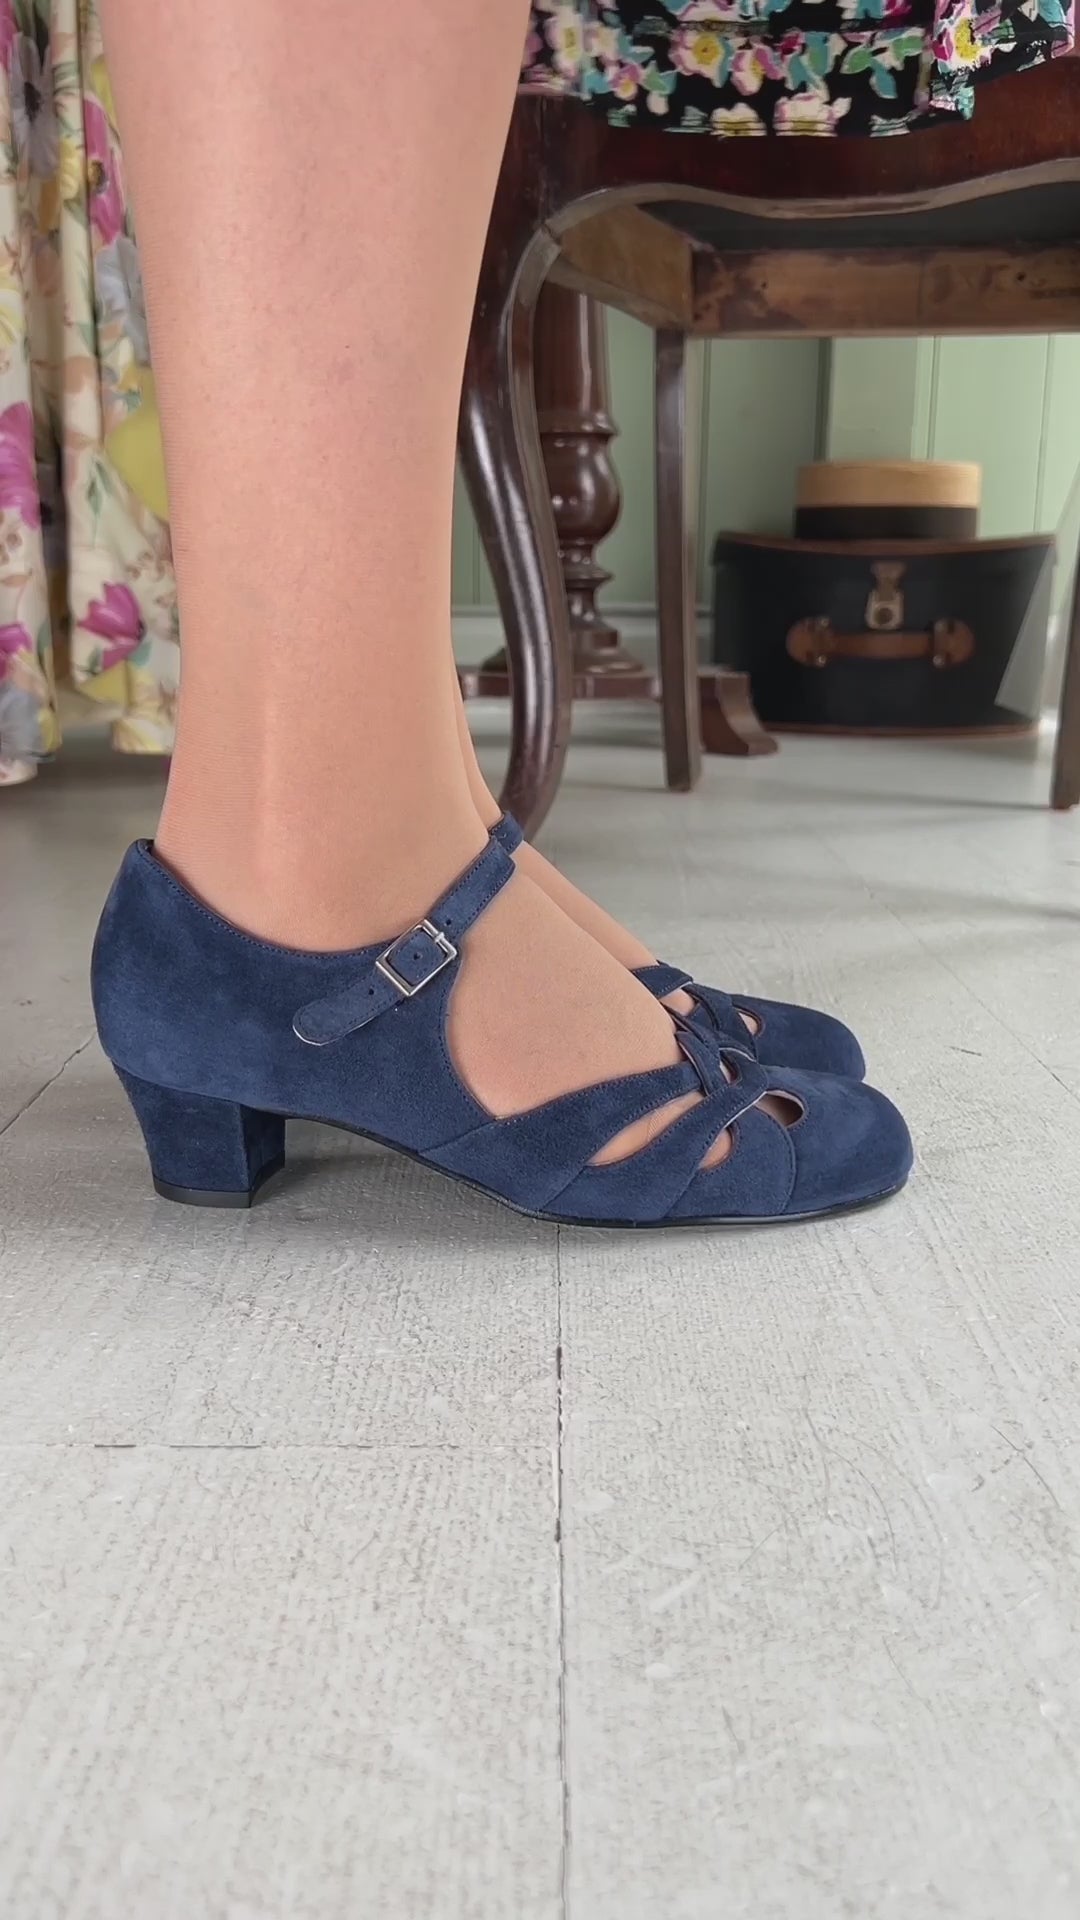 Everyday 1930s /1940s style suede sandals - Navy blue - Ida